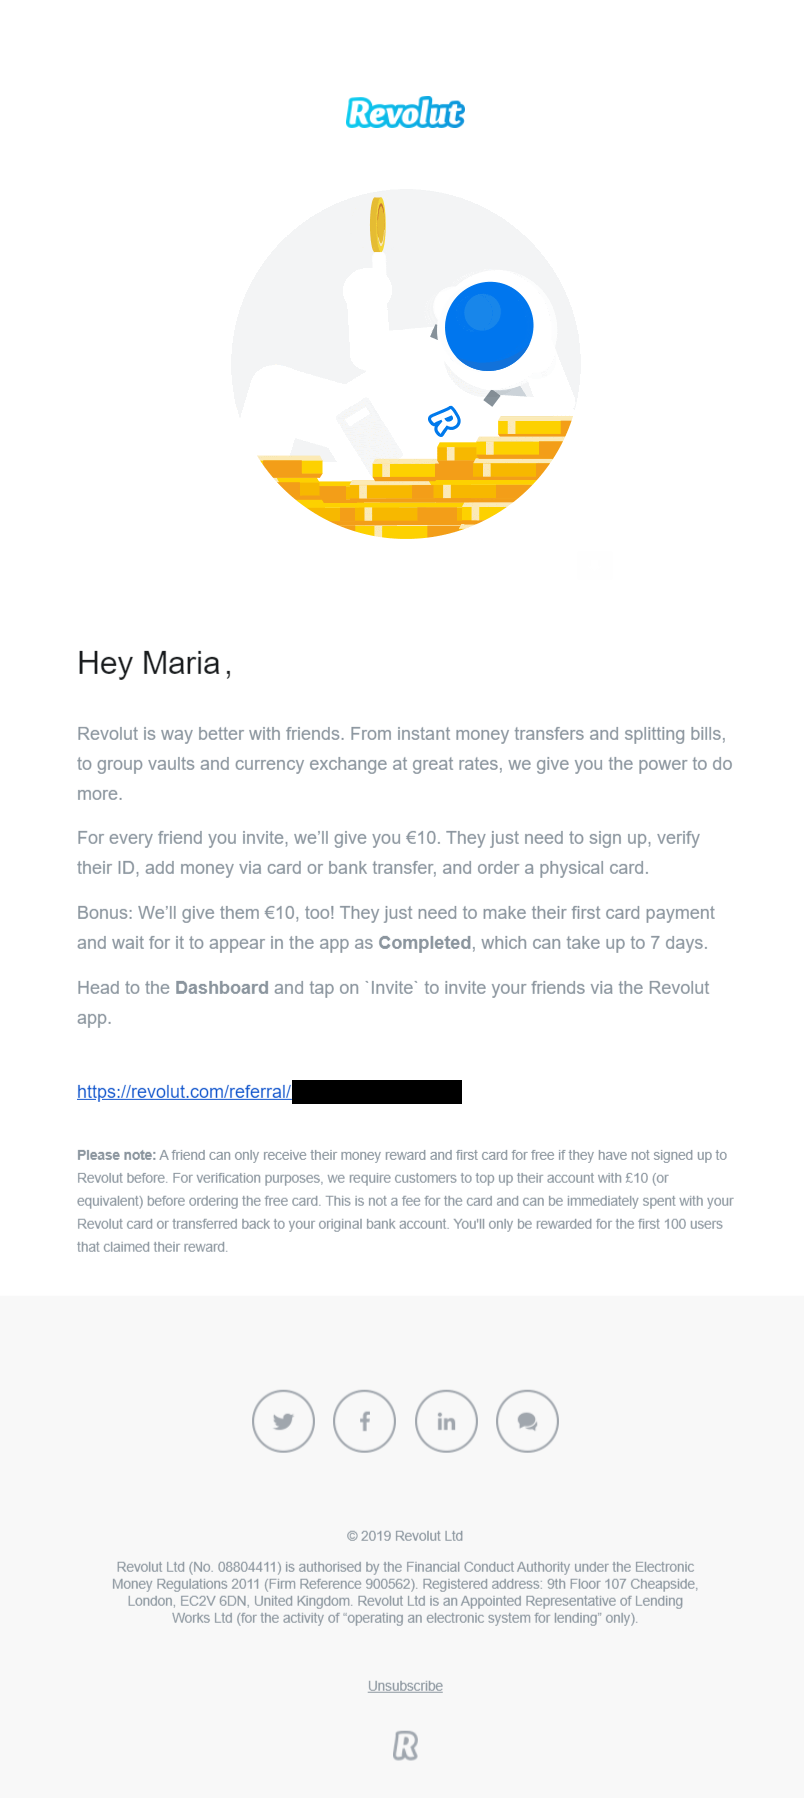 fintech email marketing examples by Revolut